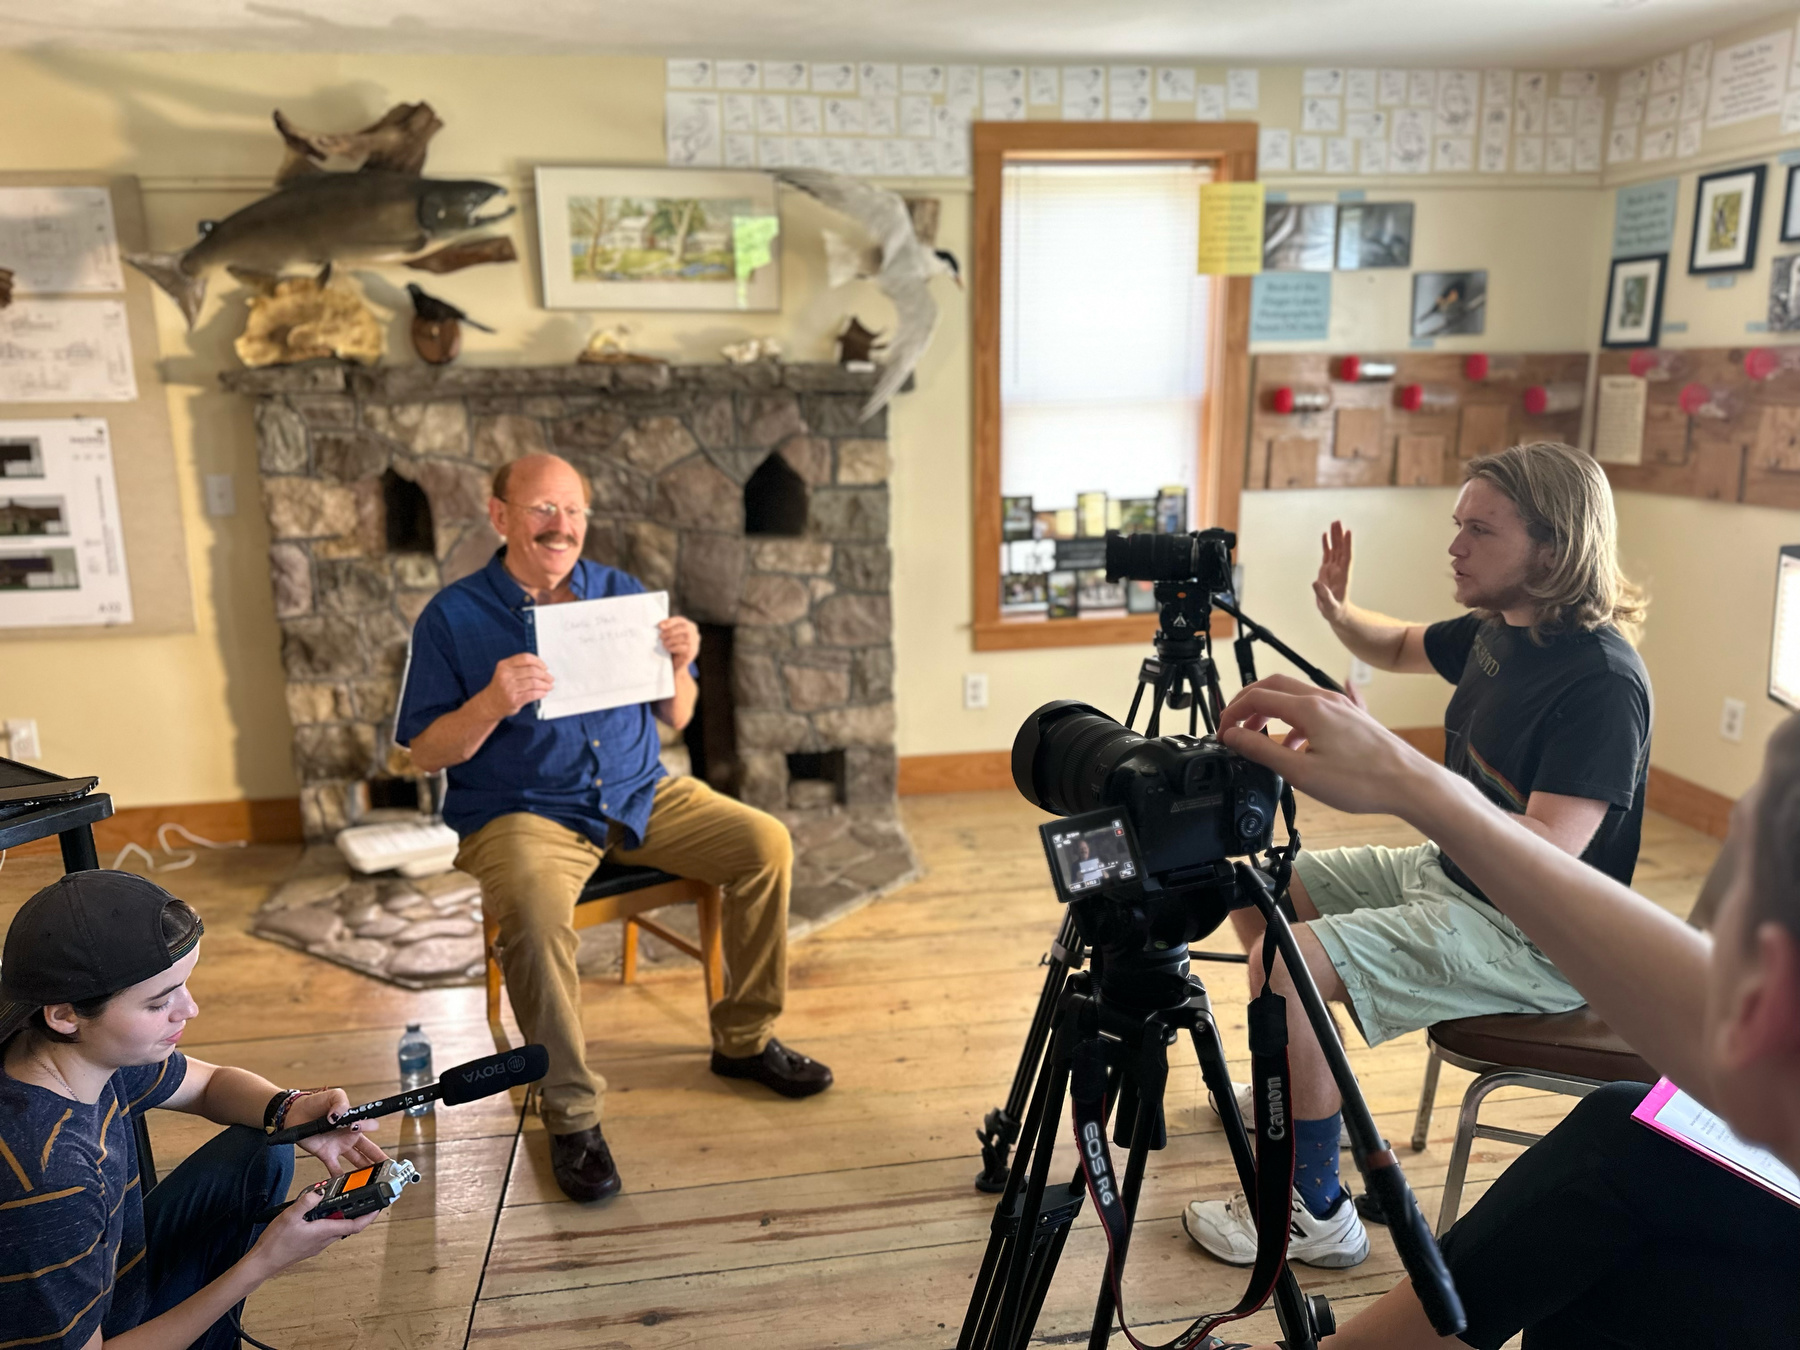 A SUNY Oswego student-faculty collaboration is producing a documentary demonstrating the biodiversity and community history of the Sterling Nature Center (SNC), a preserve 10 miles west of the lakeside campus